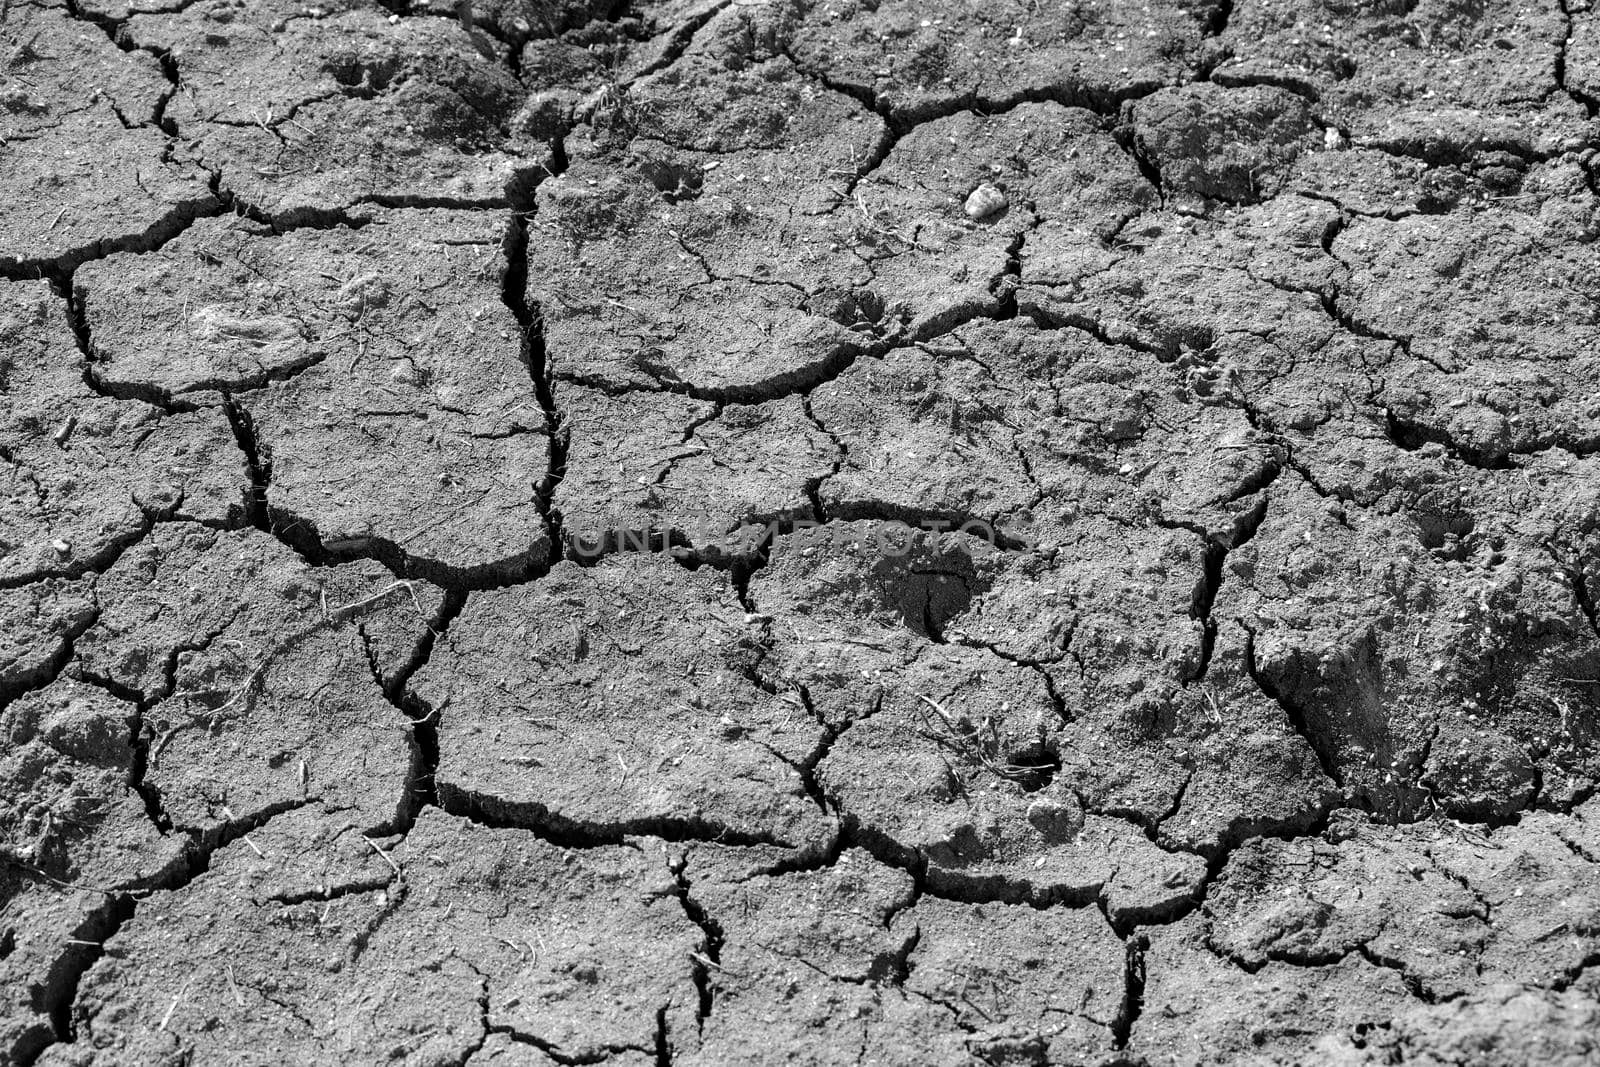 Texture of a cracked surface of a soil by Nobilior